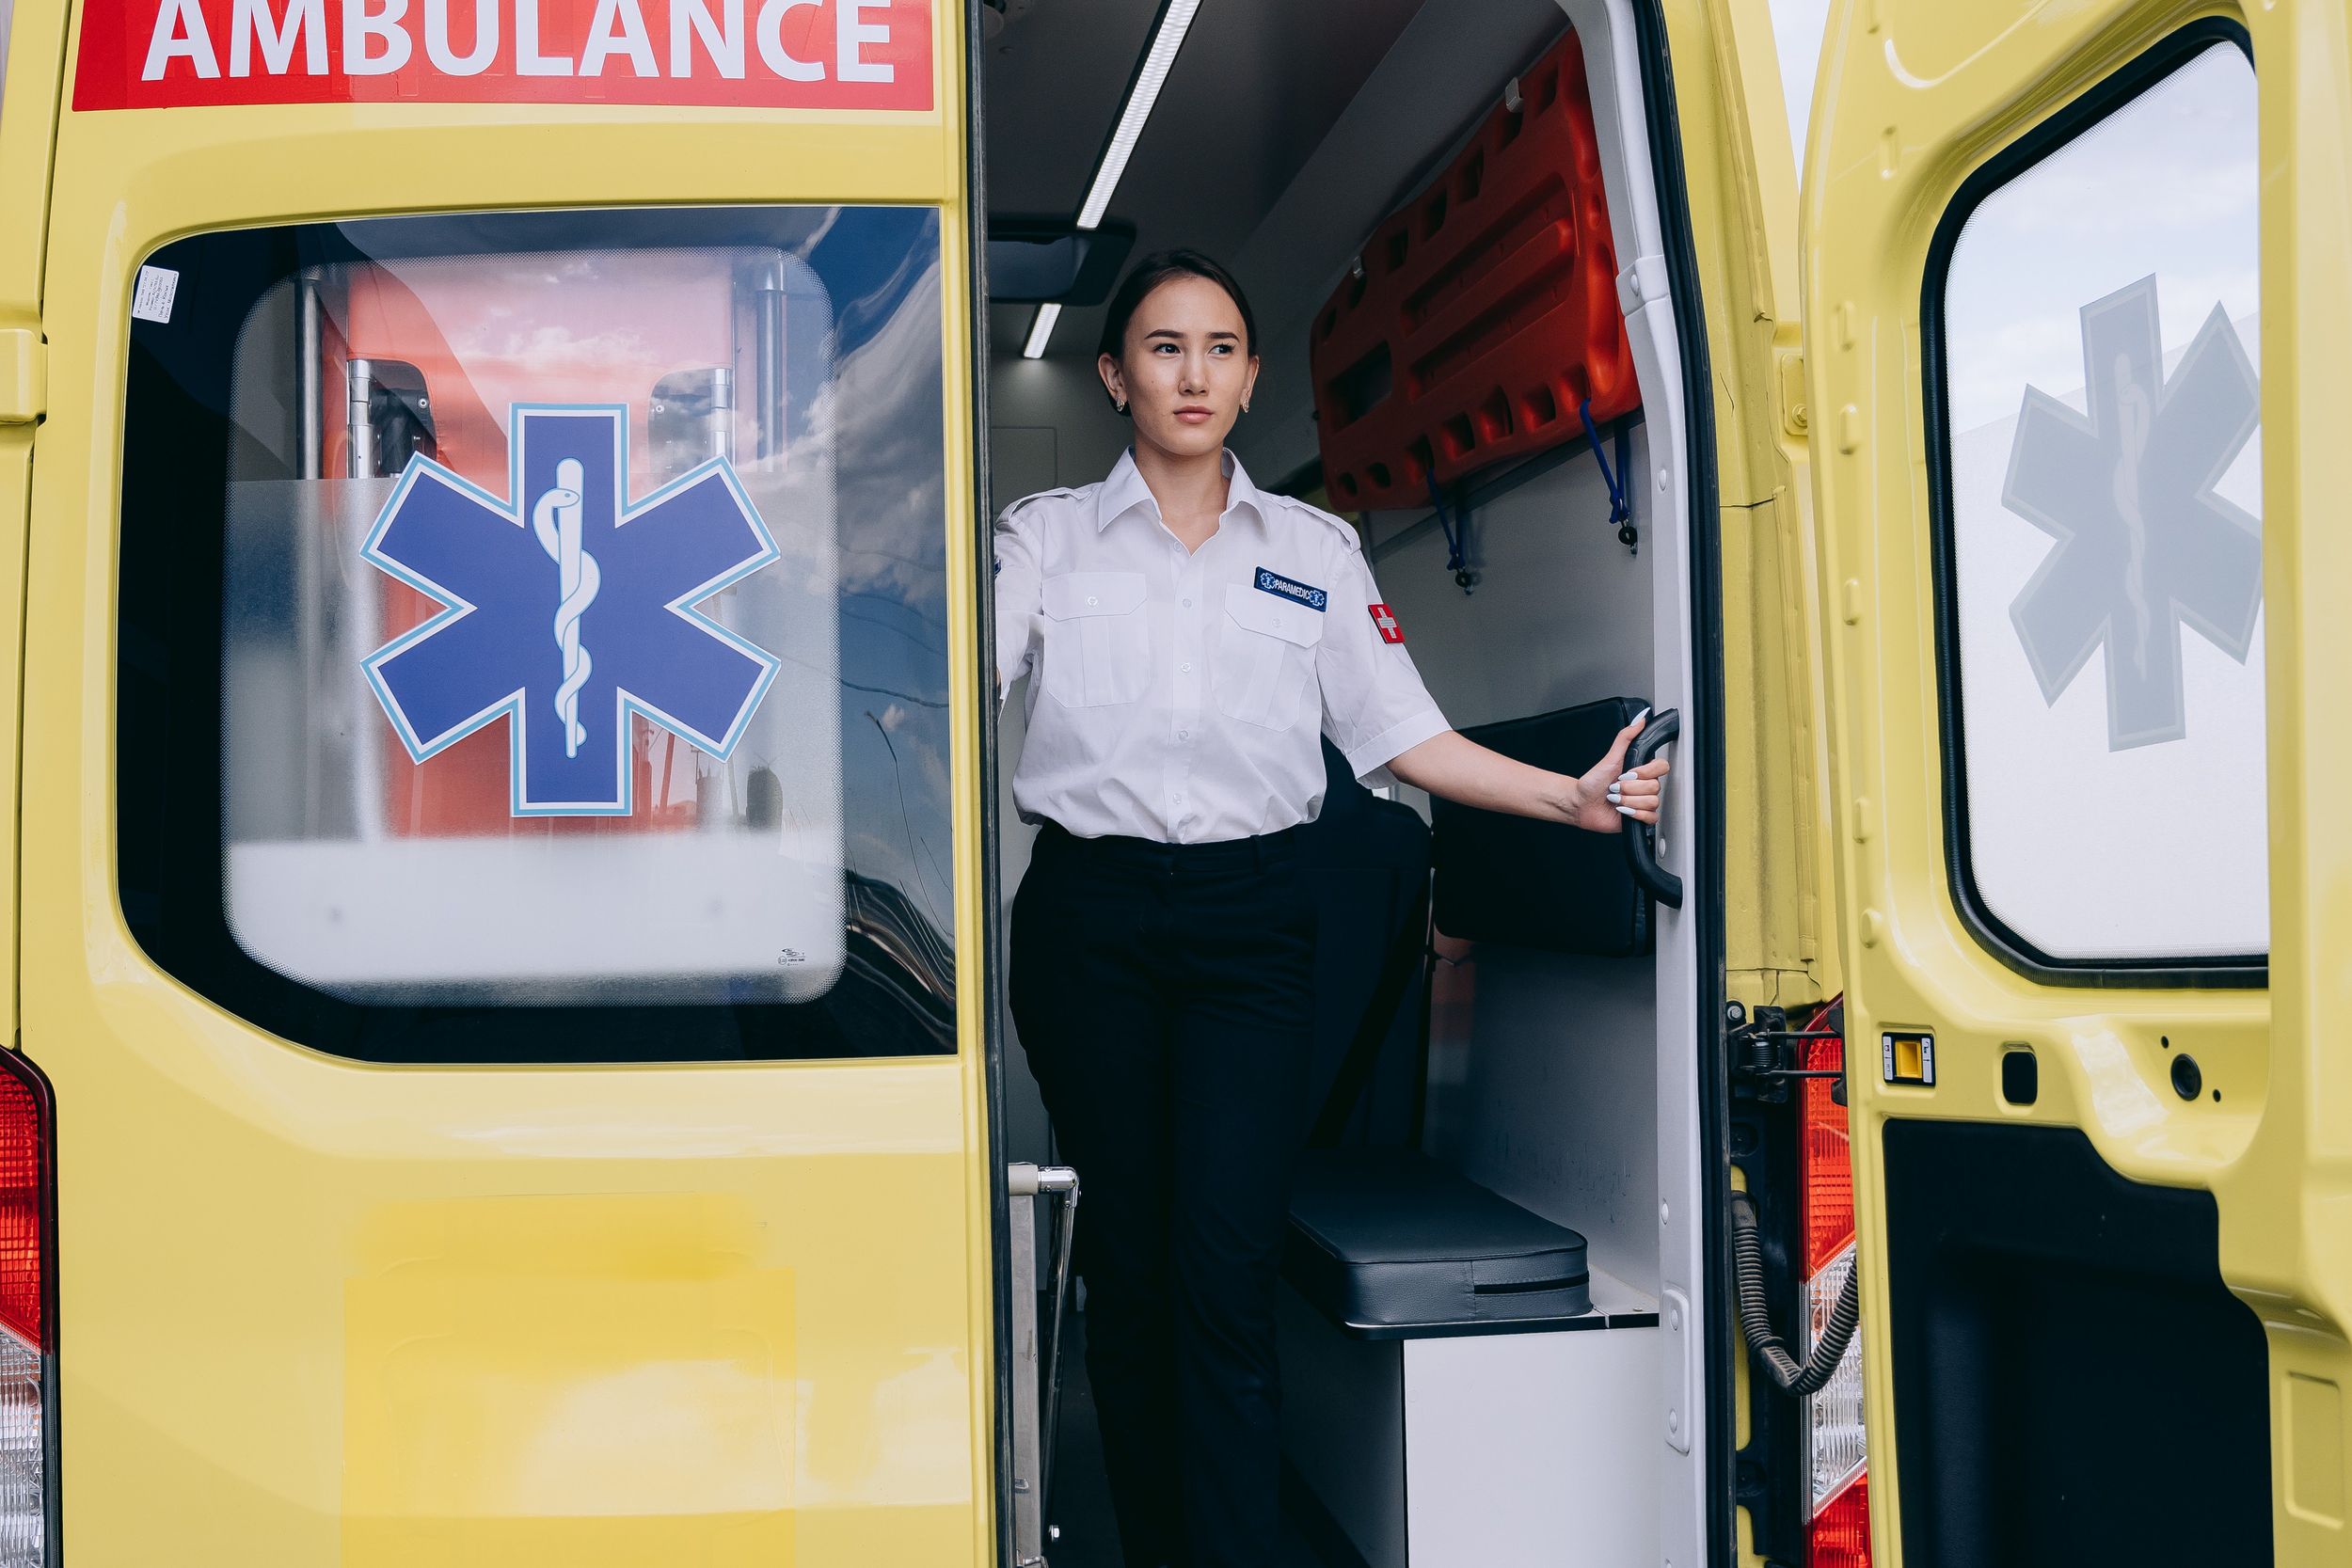 Paramedic standing in the back of an open ambulance.